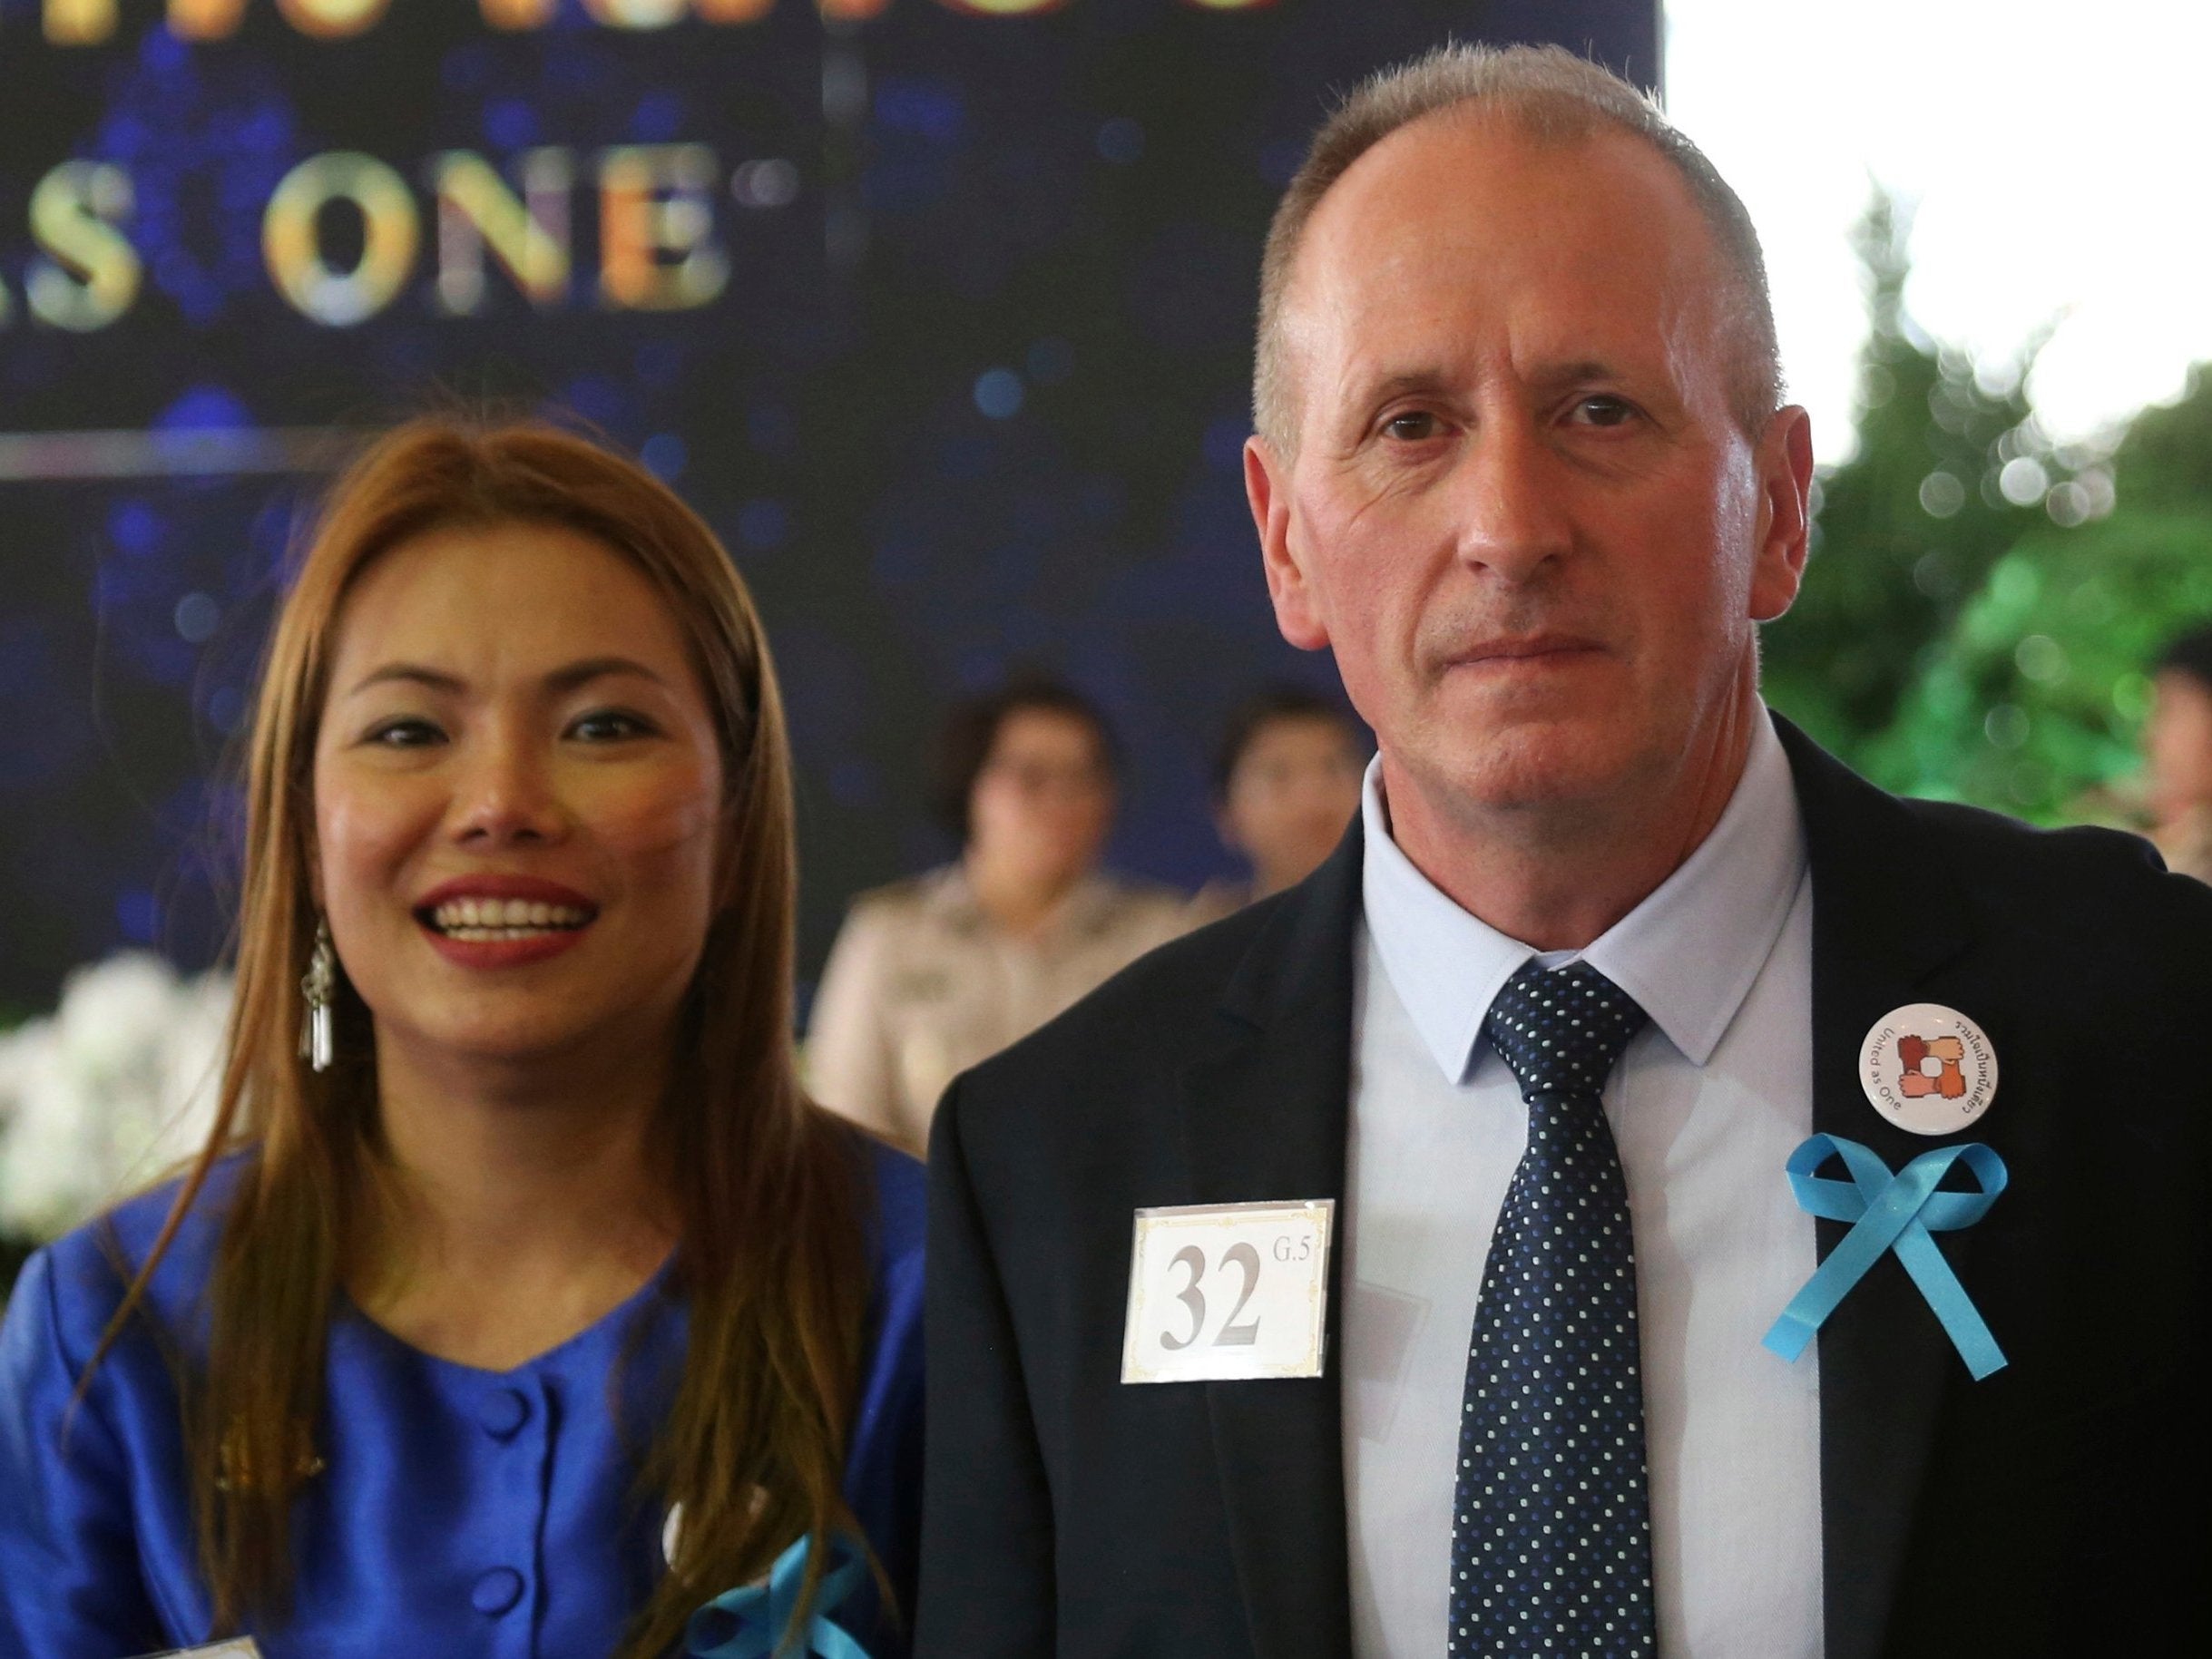 Vern Unsworth and his girlfriend Woranan Ratrawiphukkun at an event in Bangkok to celebrate the successful cave rescue